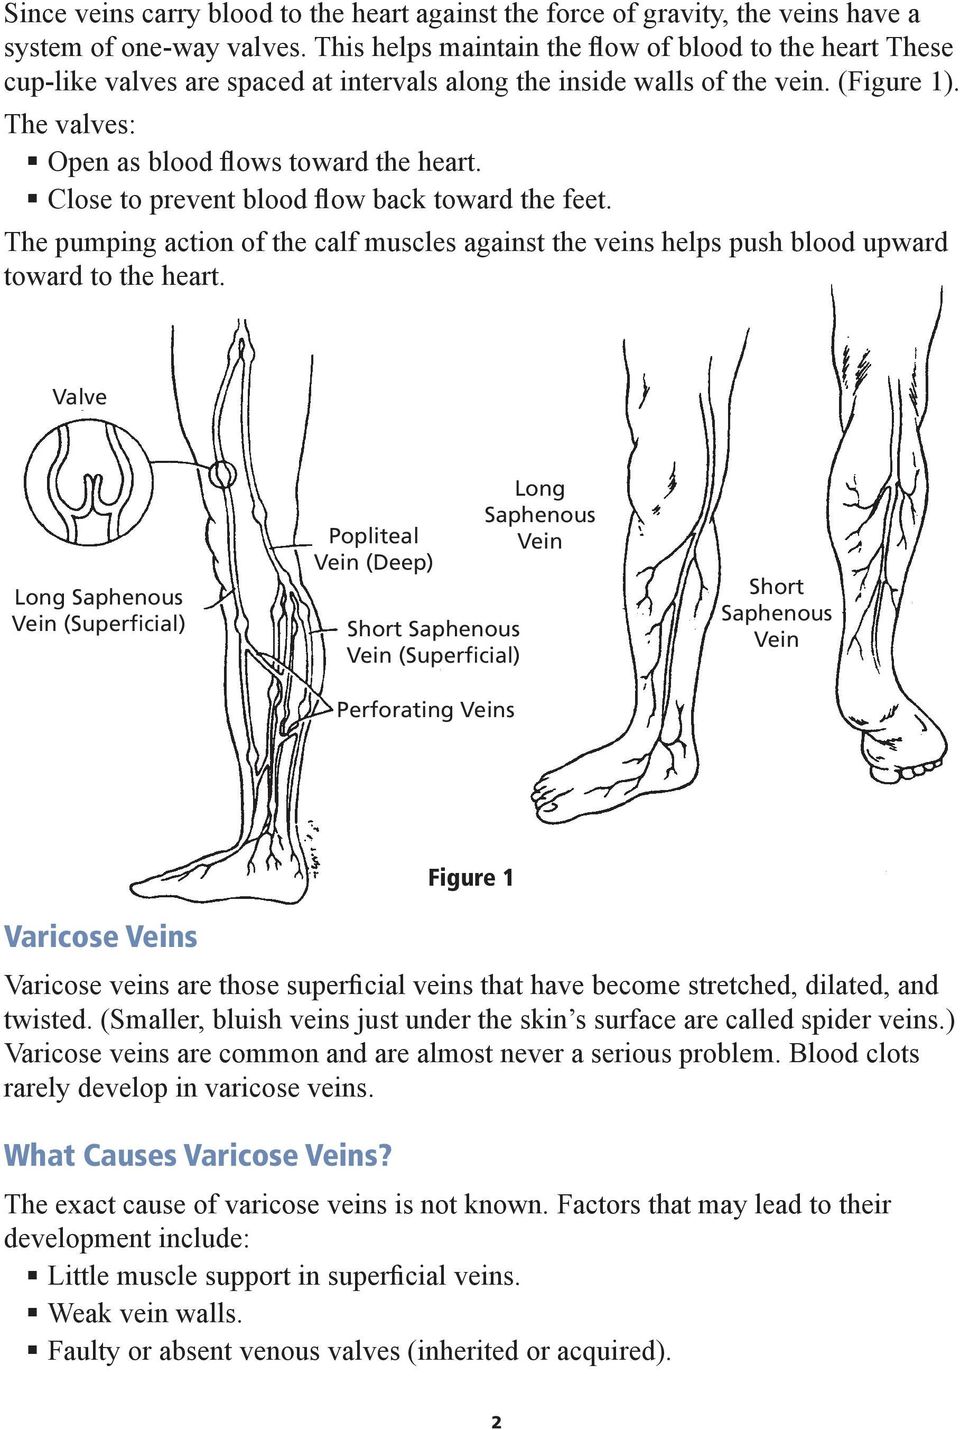 Close to prevent blood flow back toward the feet. The pumping action of the calf muscles against the veins helps push blood upward toward to the heart.